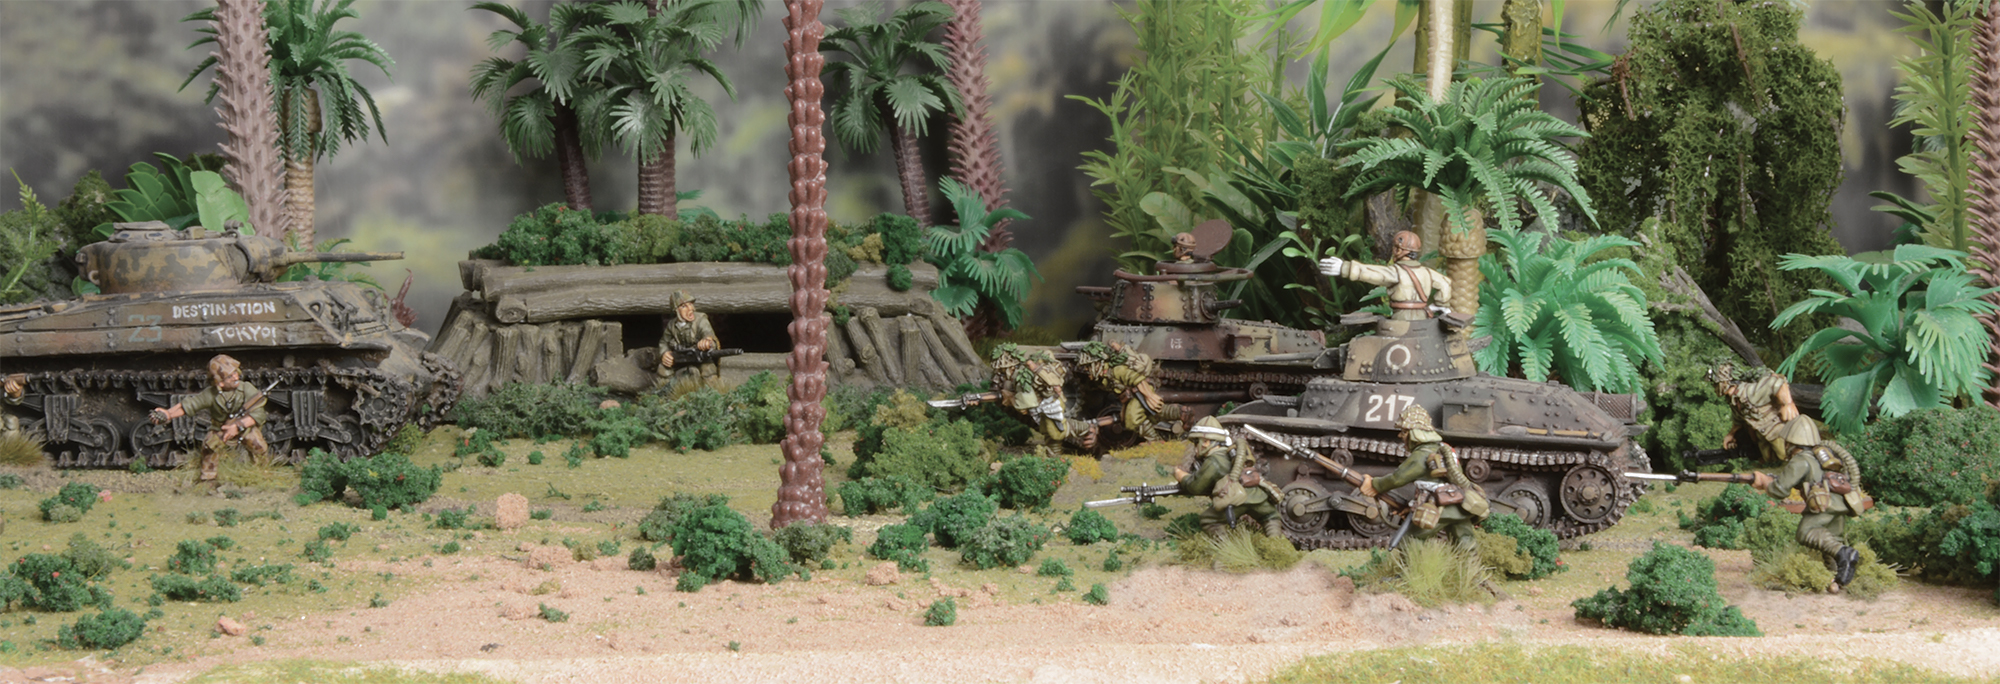 Bolt Action: The Pacific Theatre - Warlord Games